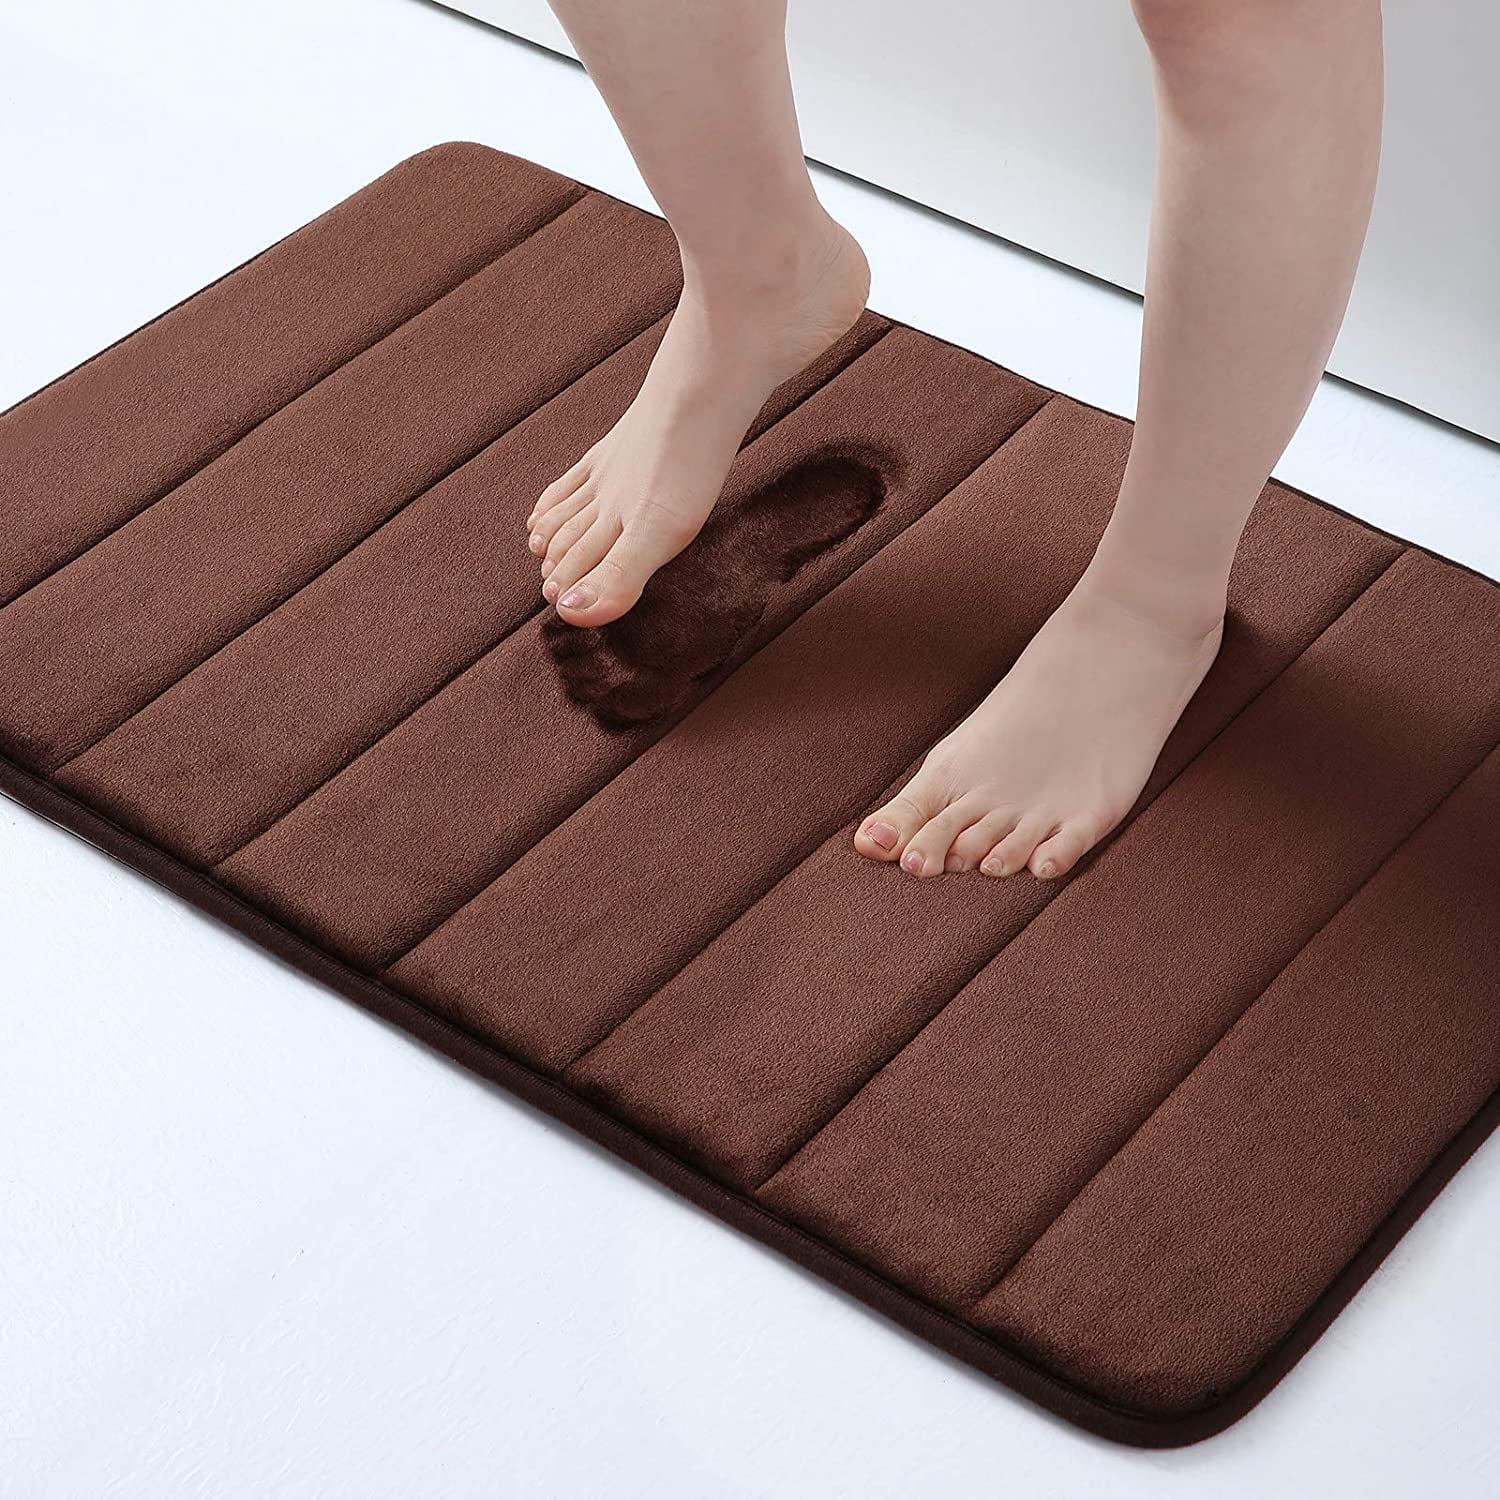 ComfiTime Bathroom Rugs – Thick Memory Foam, Non-Slip Bath Mat, Soft Plush  Velvet Top, Ultra Absorbent, Small, Large & Long Rugs for Bathroom Floor,  17 x 24, Brown 